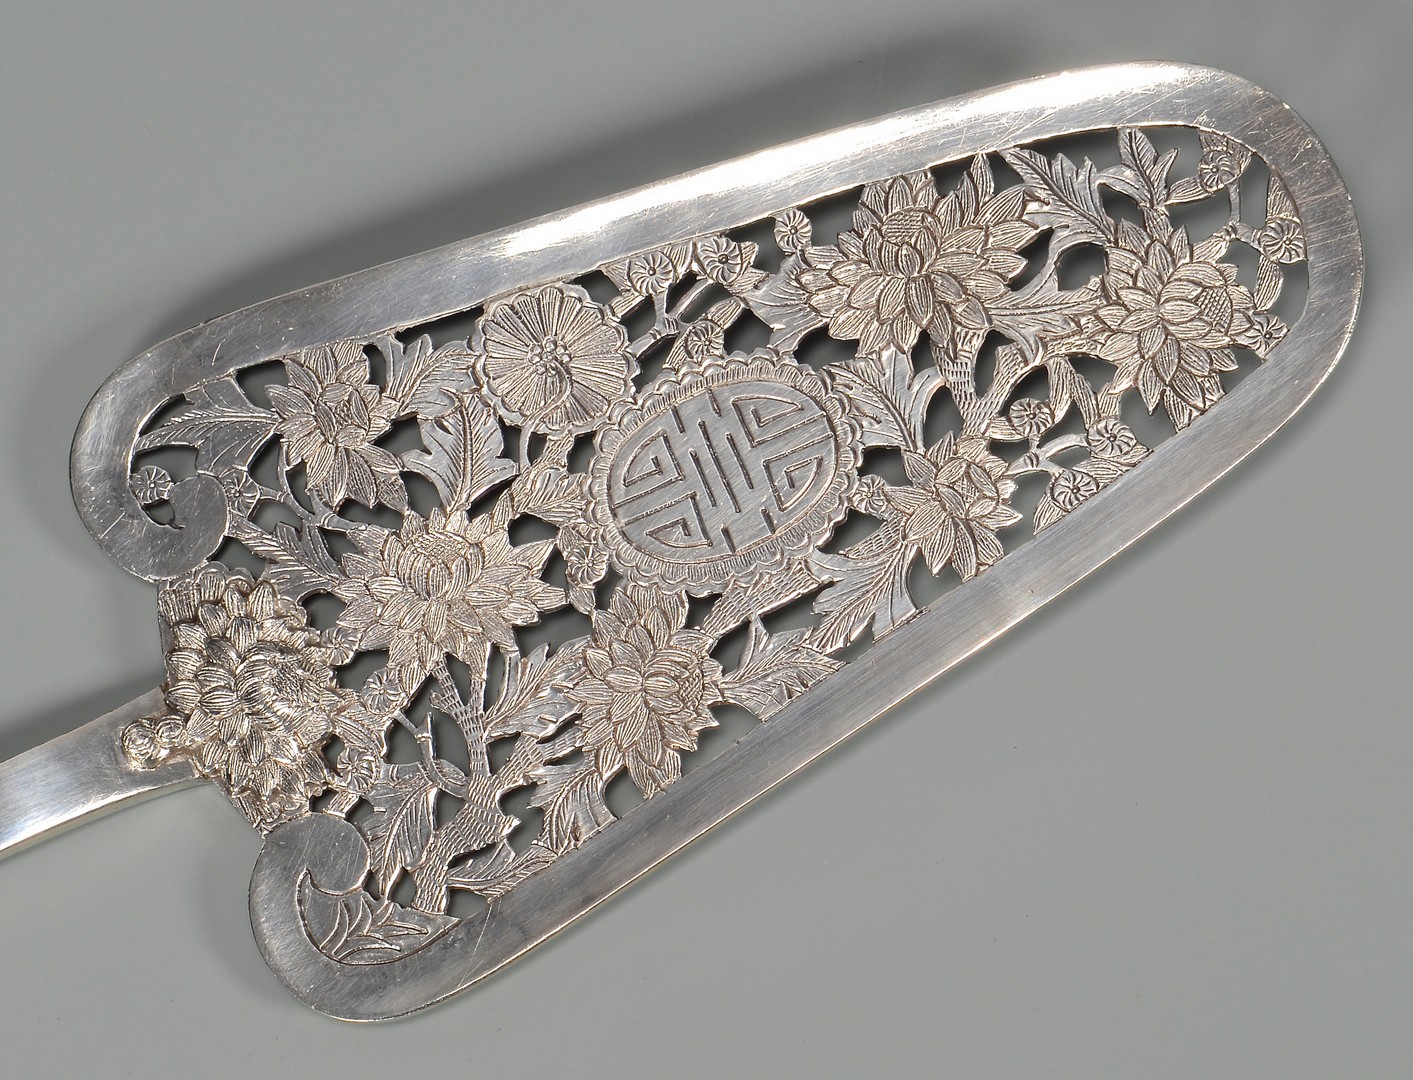 Lot 5: Chinese Export Silver Pastry Server